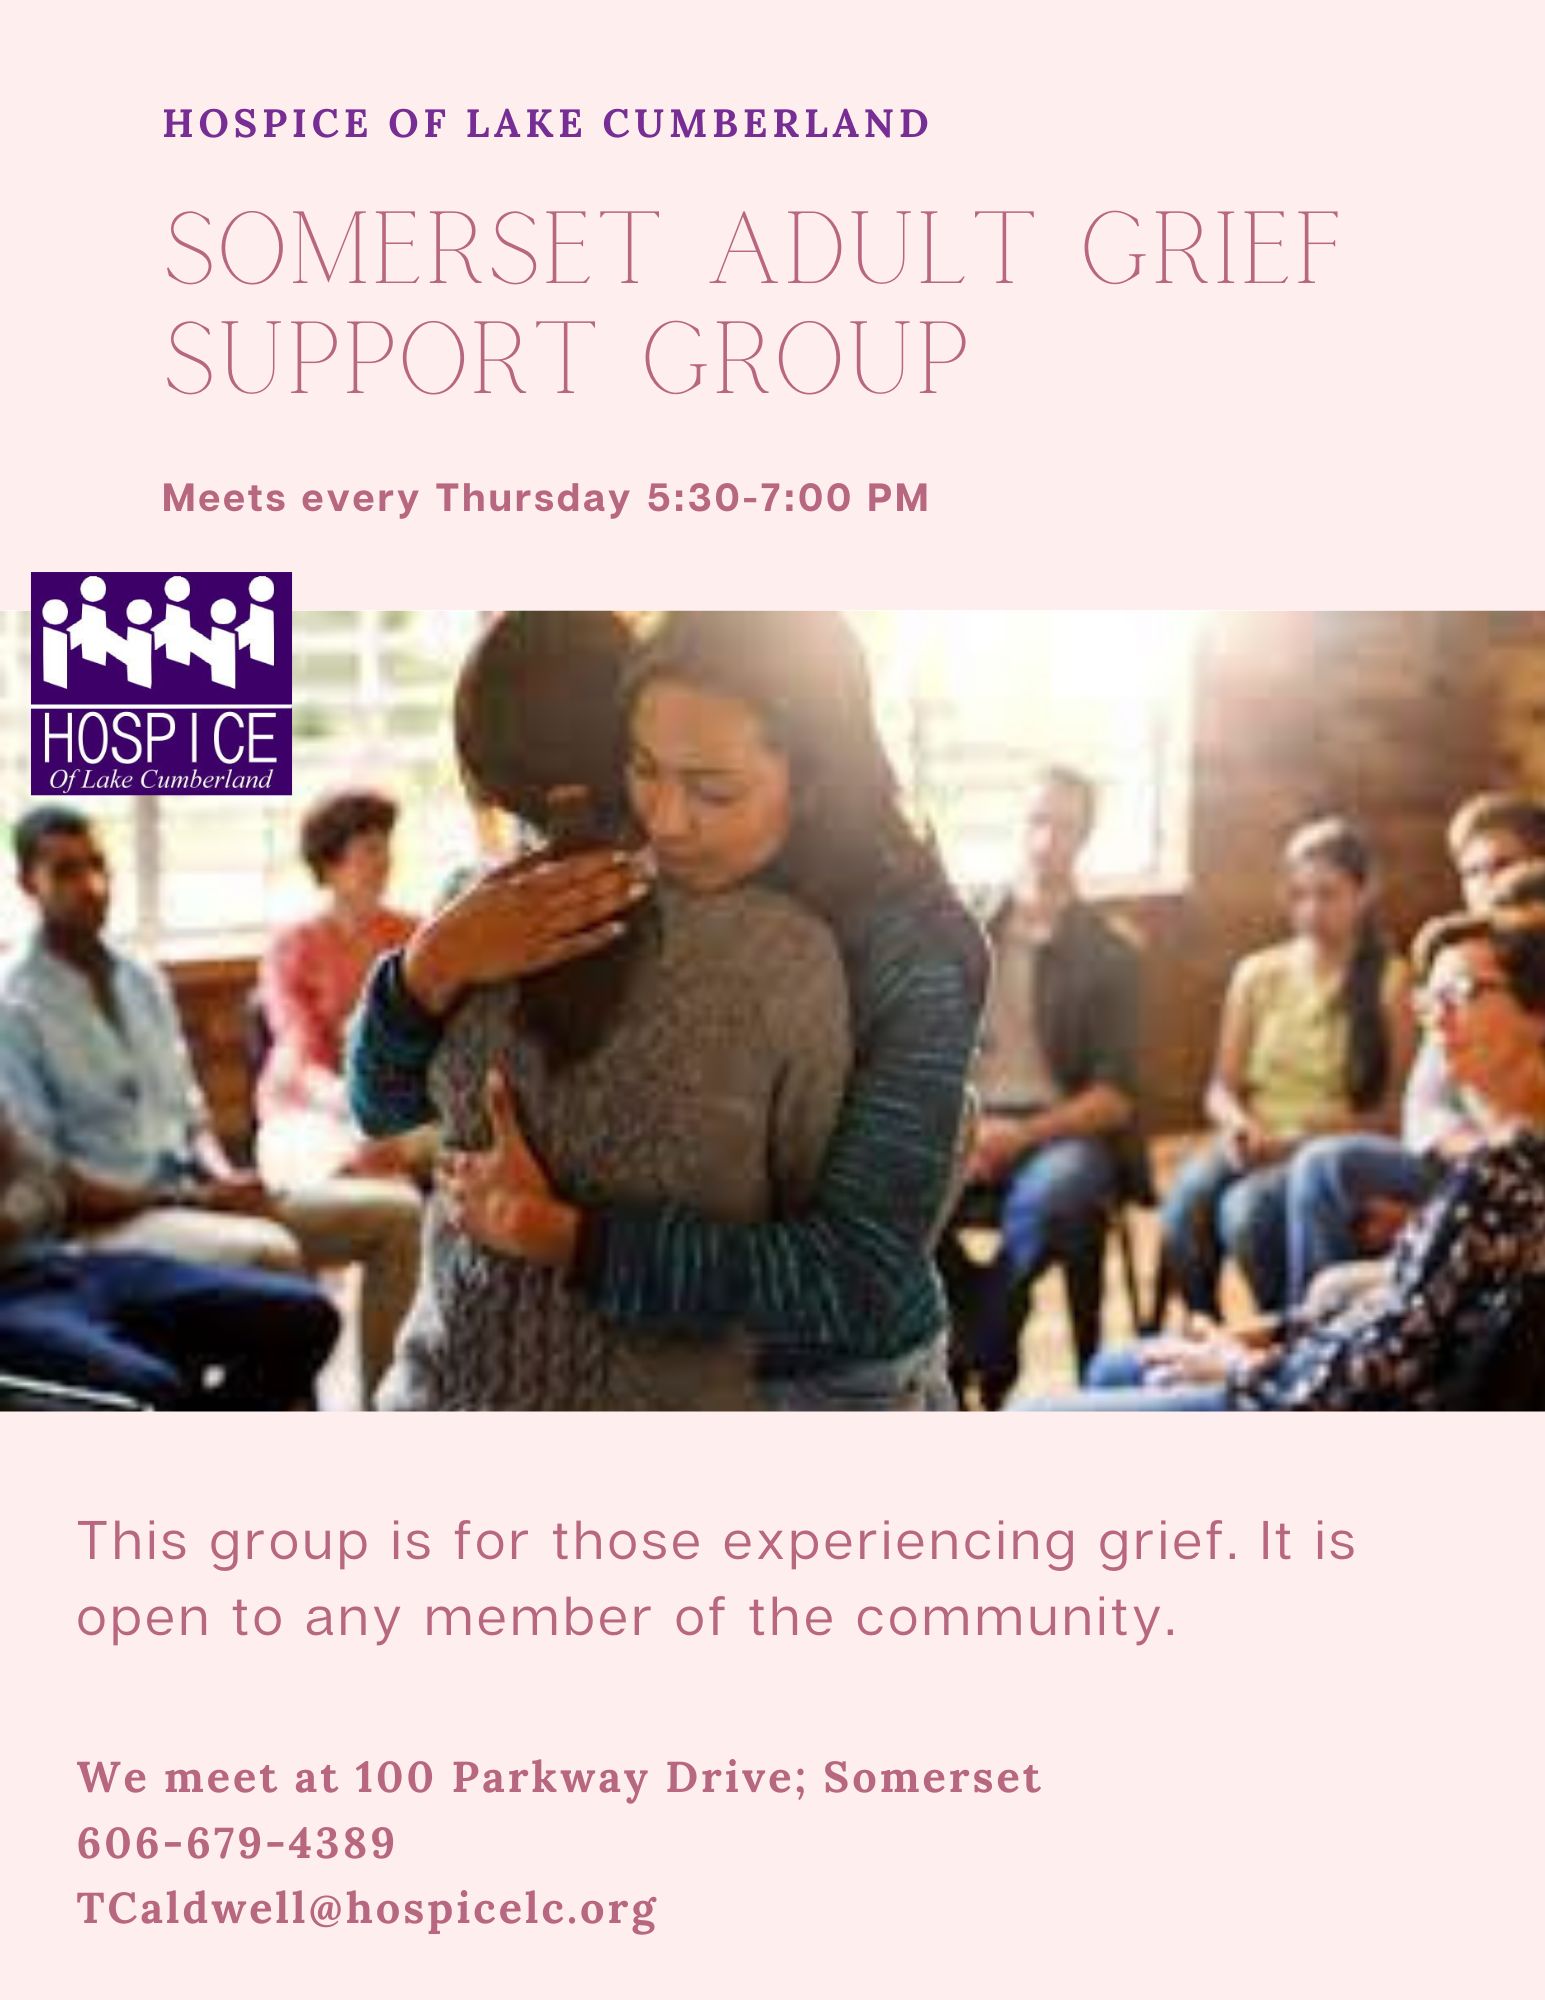 Call 606-679-4389 or email Tcaldwell@hospicelc.org for information on the Somerset Bereavement Group